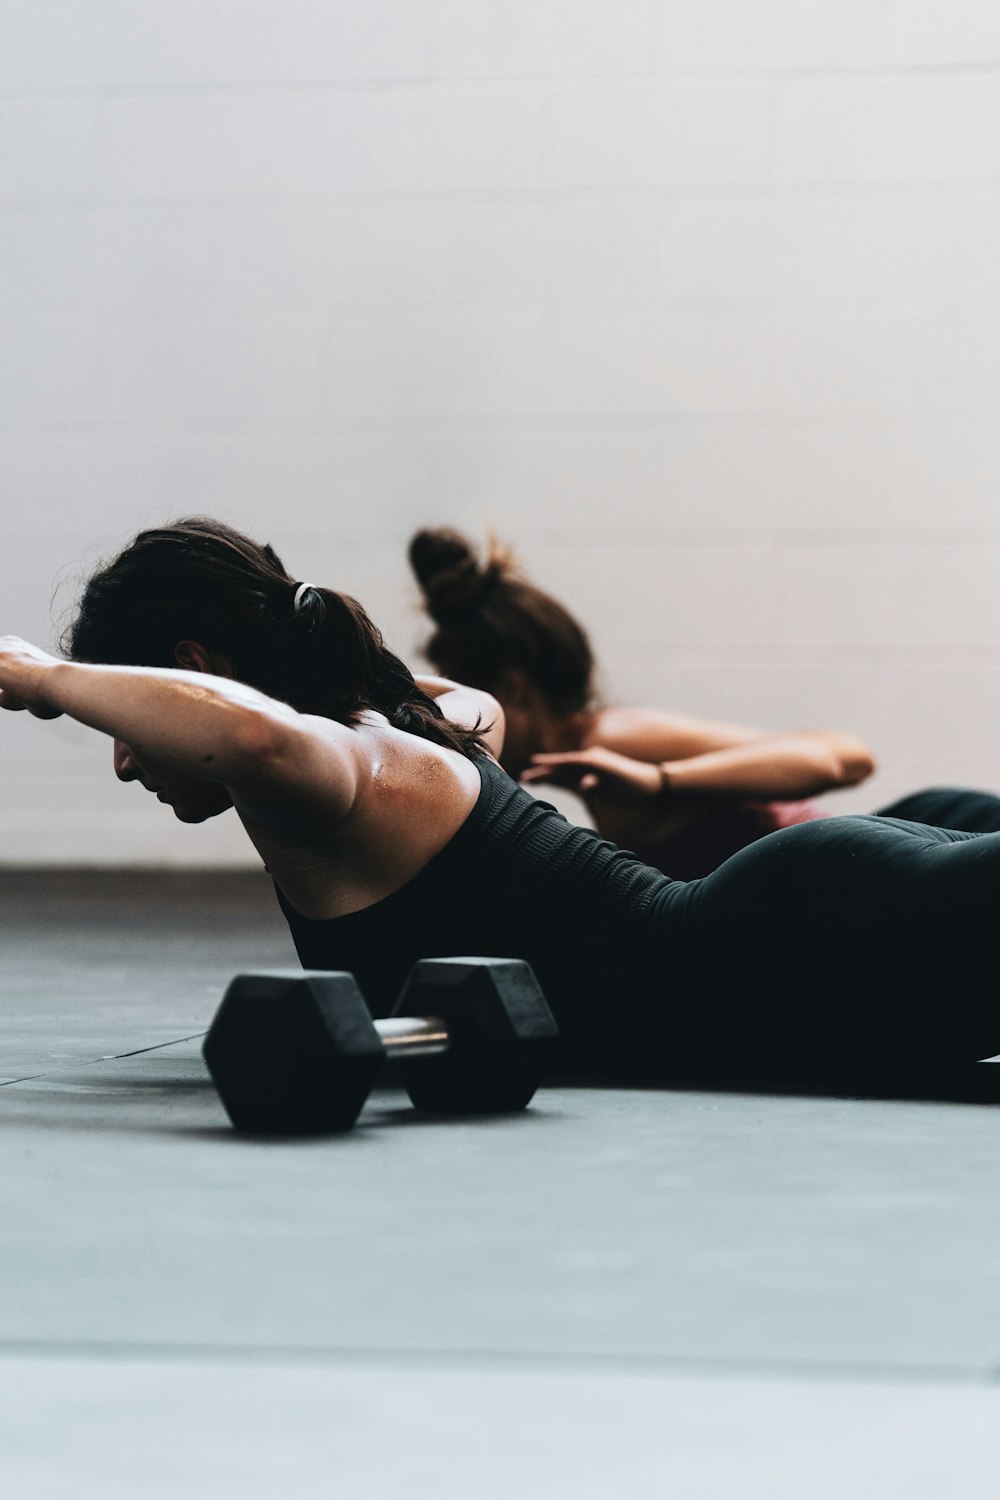 500+ Pilates Pictures | Download Free Images on Unsplash